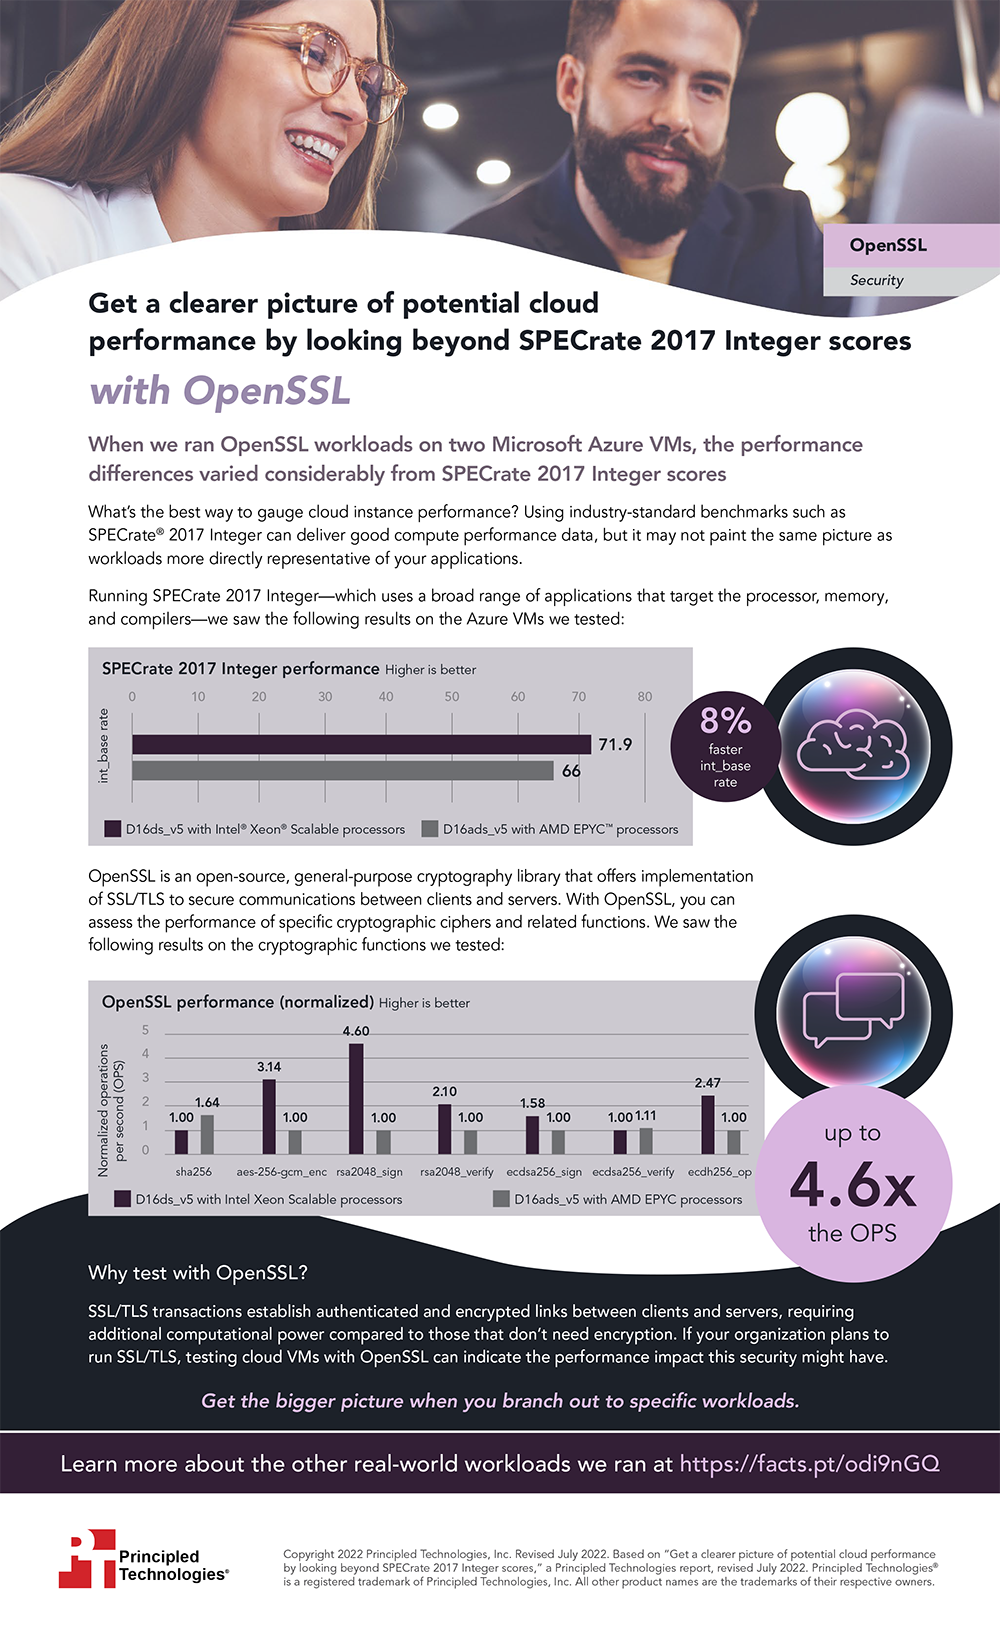 Get a clearer picture of potential cloud performance by looking beyond SPECrate 2017 Integer scores with OpenSSL - Infographic